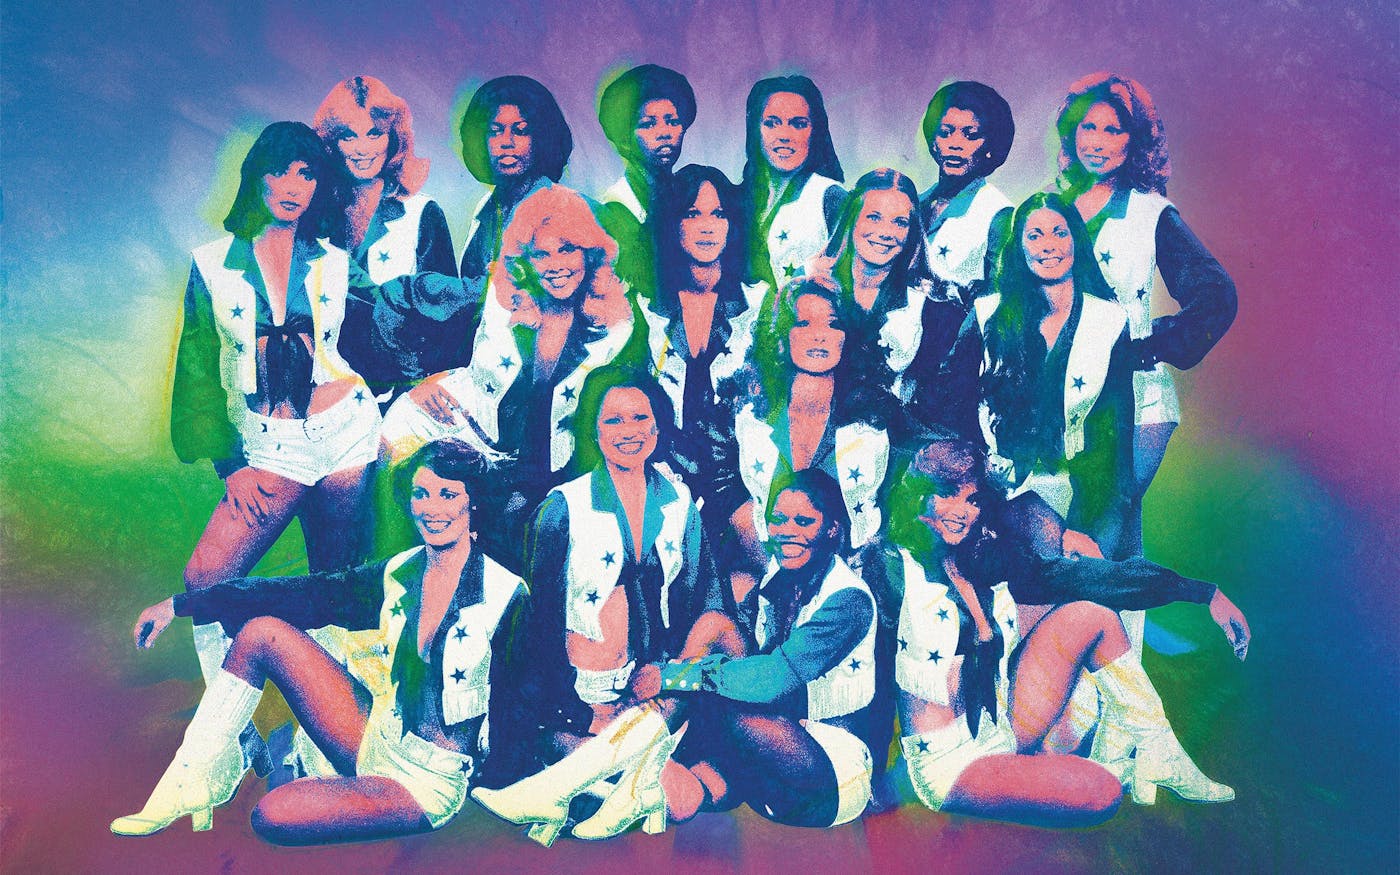 School Double Penetration - Sex, Scandal, and Sisterhood: Fifty Years of the Dallas Cowboys Cheerleaders